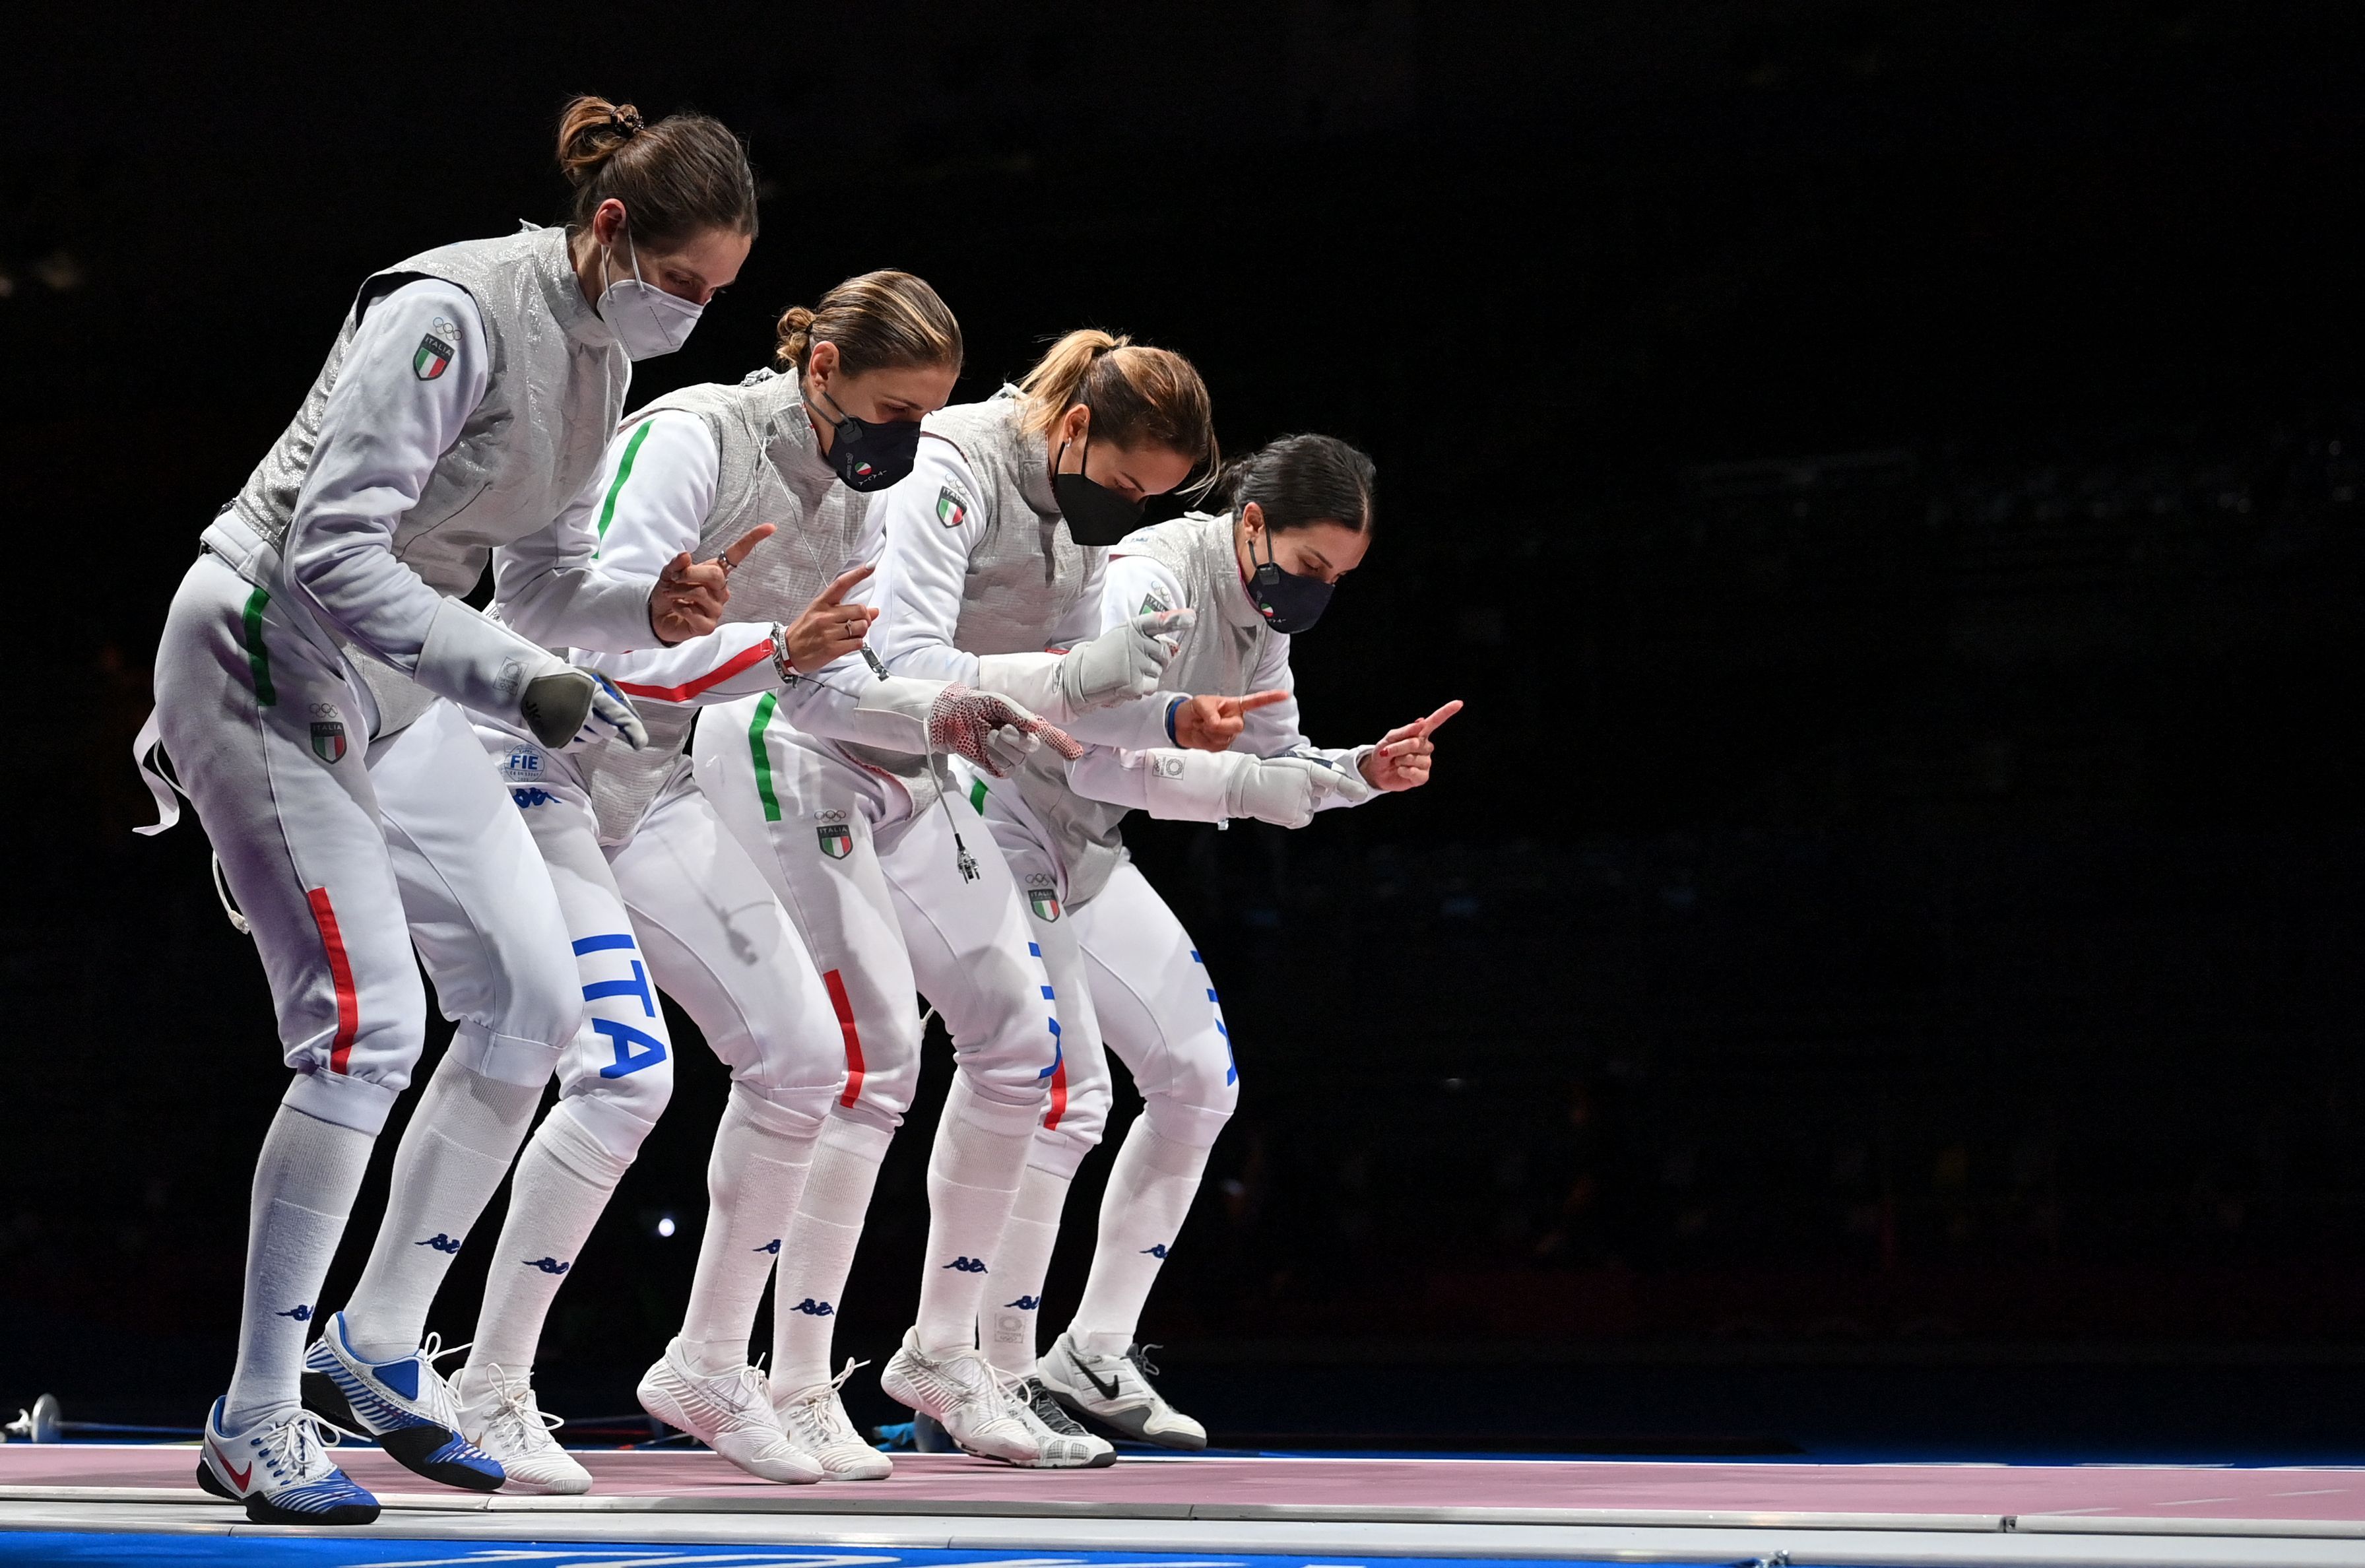   Italy's fencer team warm up prior the match against France in the women's foil team semifinal bout during the Tokyo 2020 Olympic Games on July 29